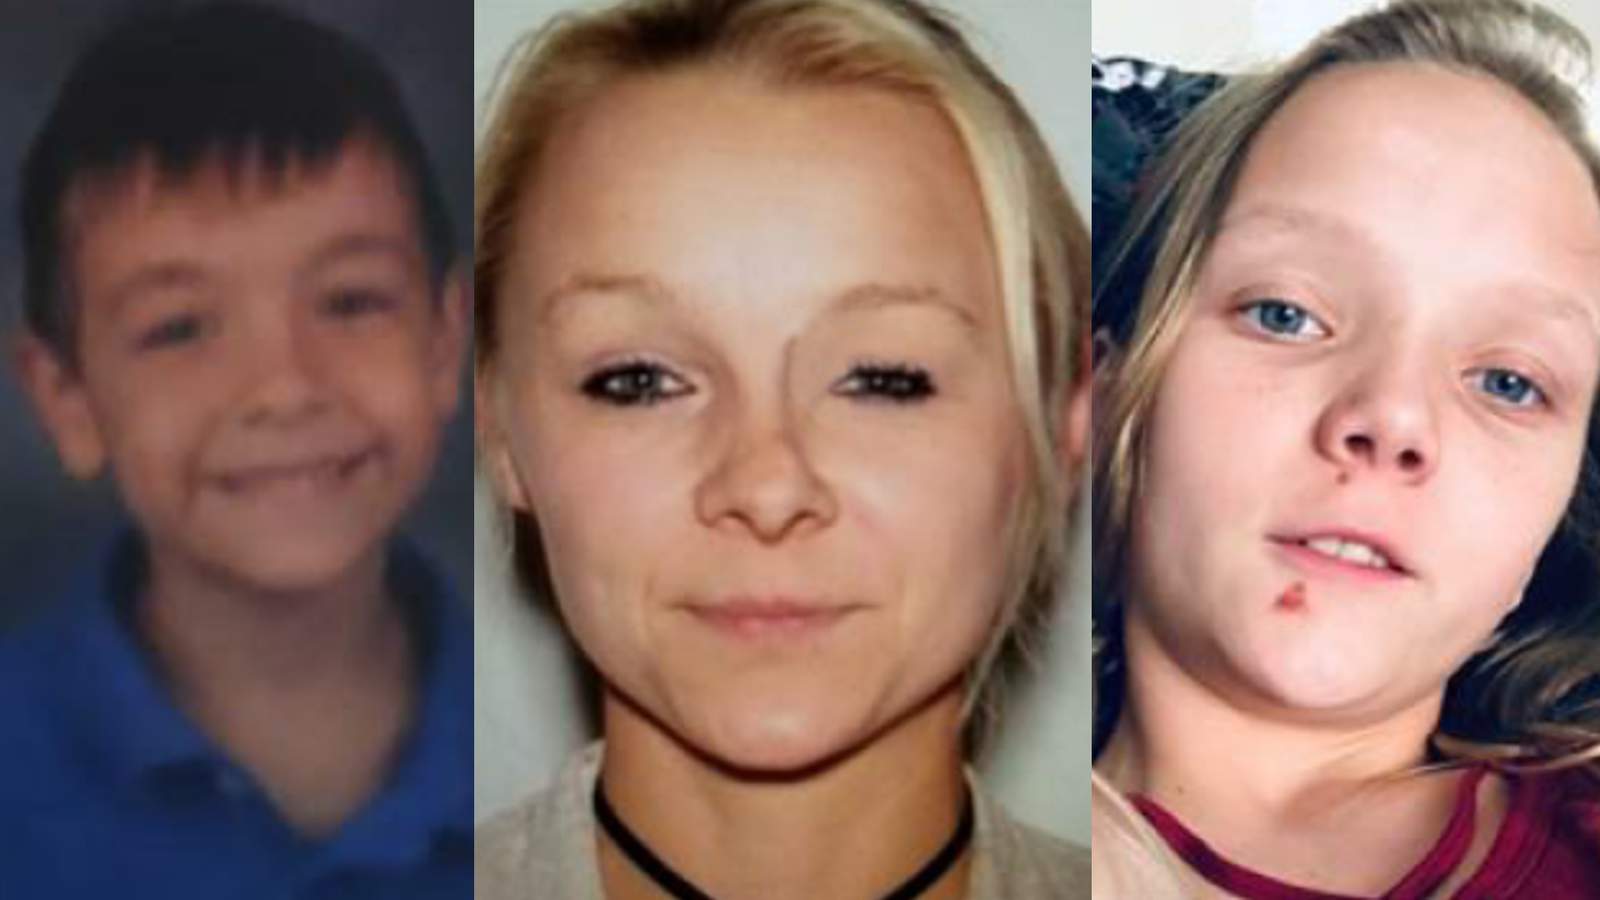 Officials: Children, mother missing after custody visit in Volusia County